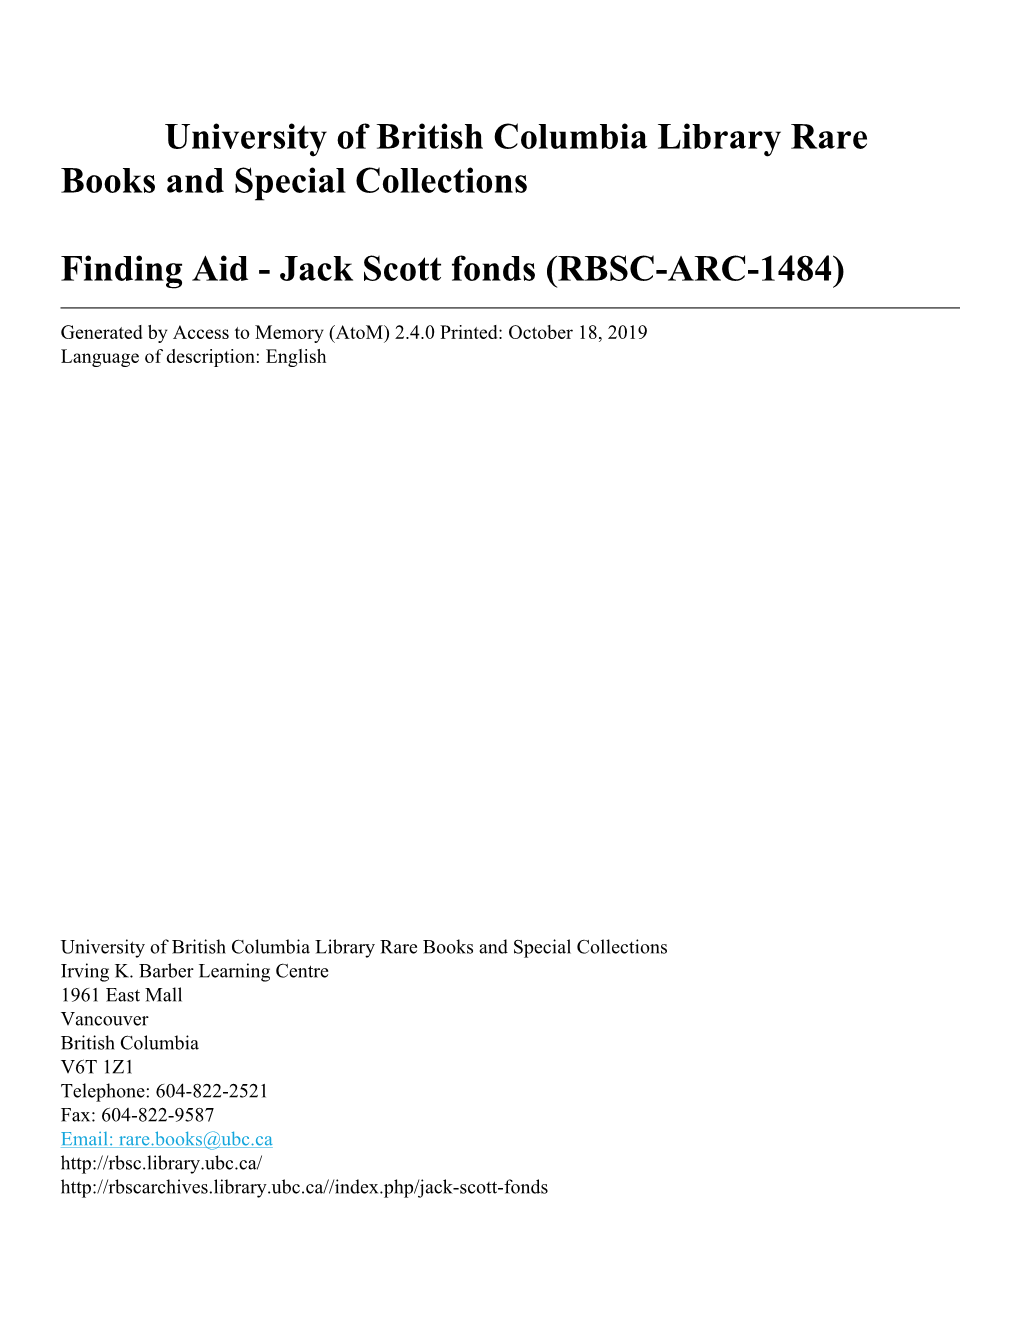 University of British Columbia Library Rare Books and Special Collections